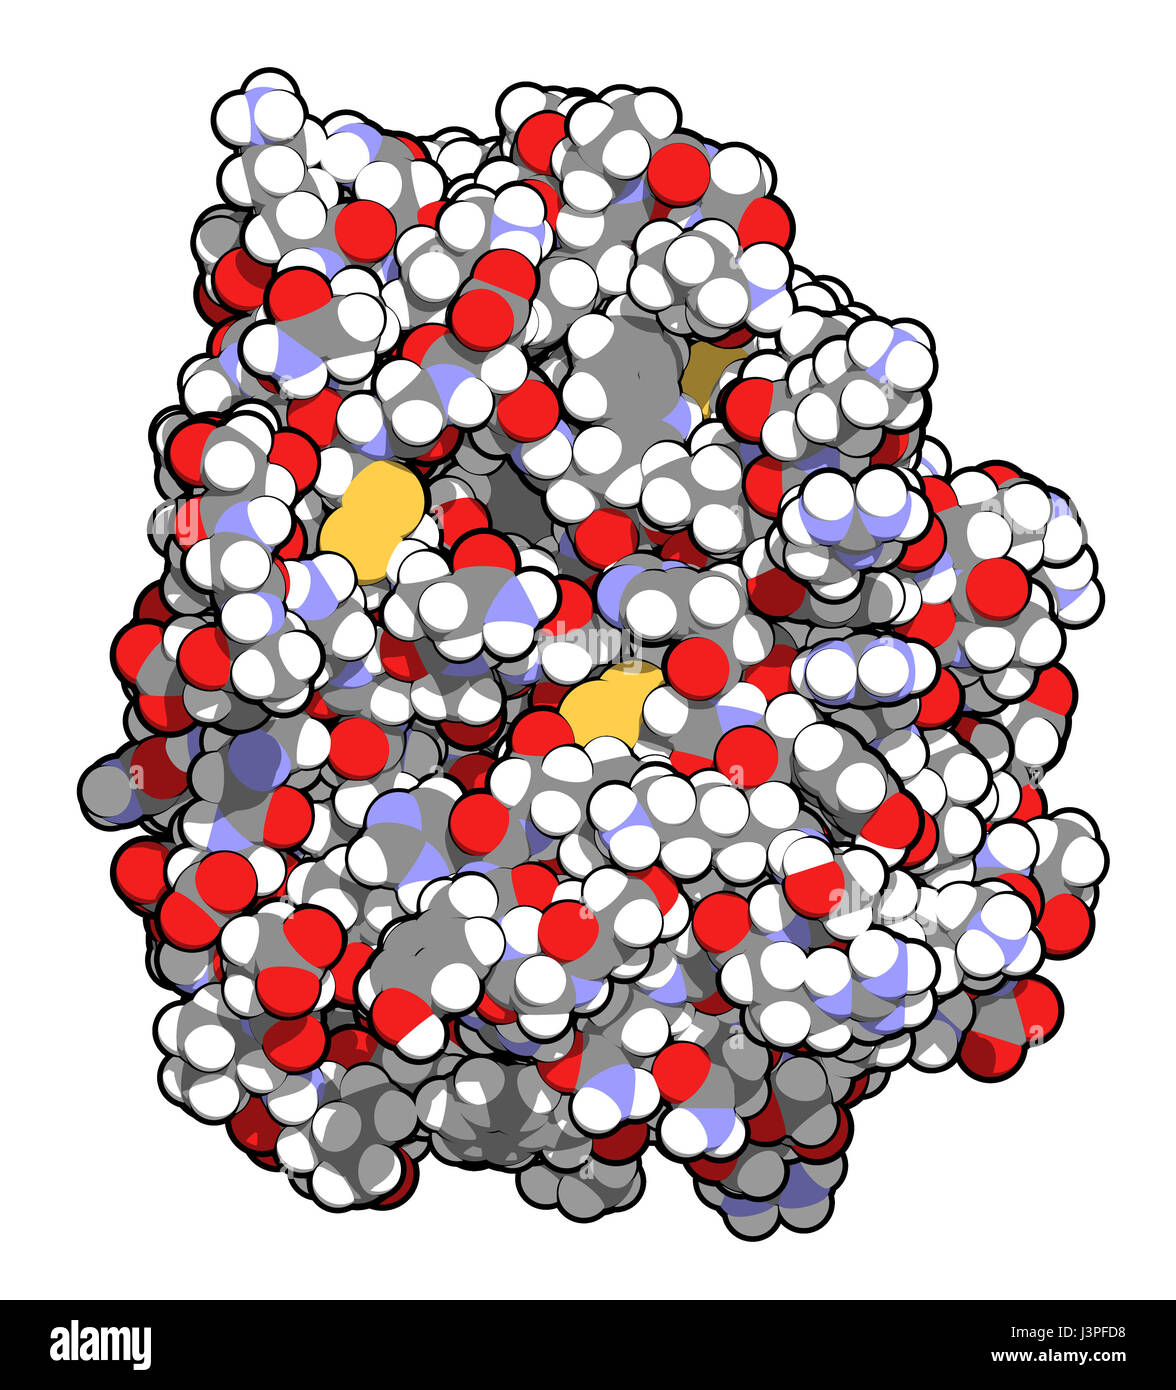 Trypsin digestive enzyme molecule (human). Enzyme that contributes to the digestion of proteins in the digestive system. Atoms are represented as sphe Stock Photo